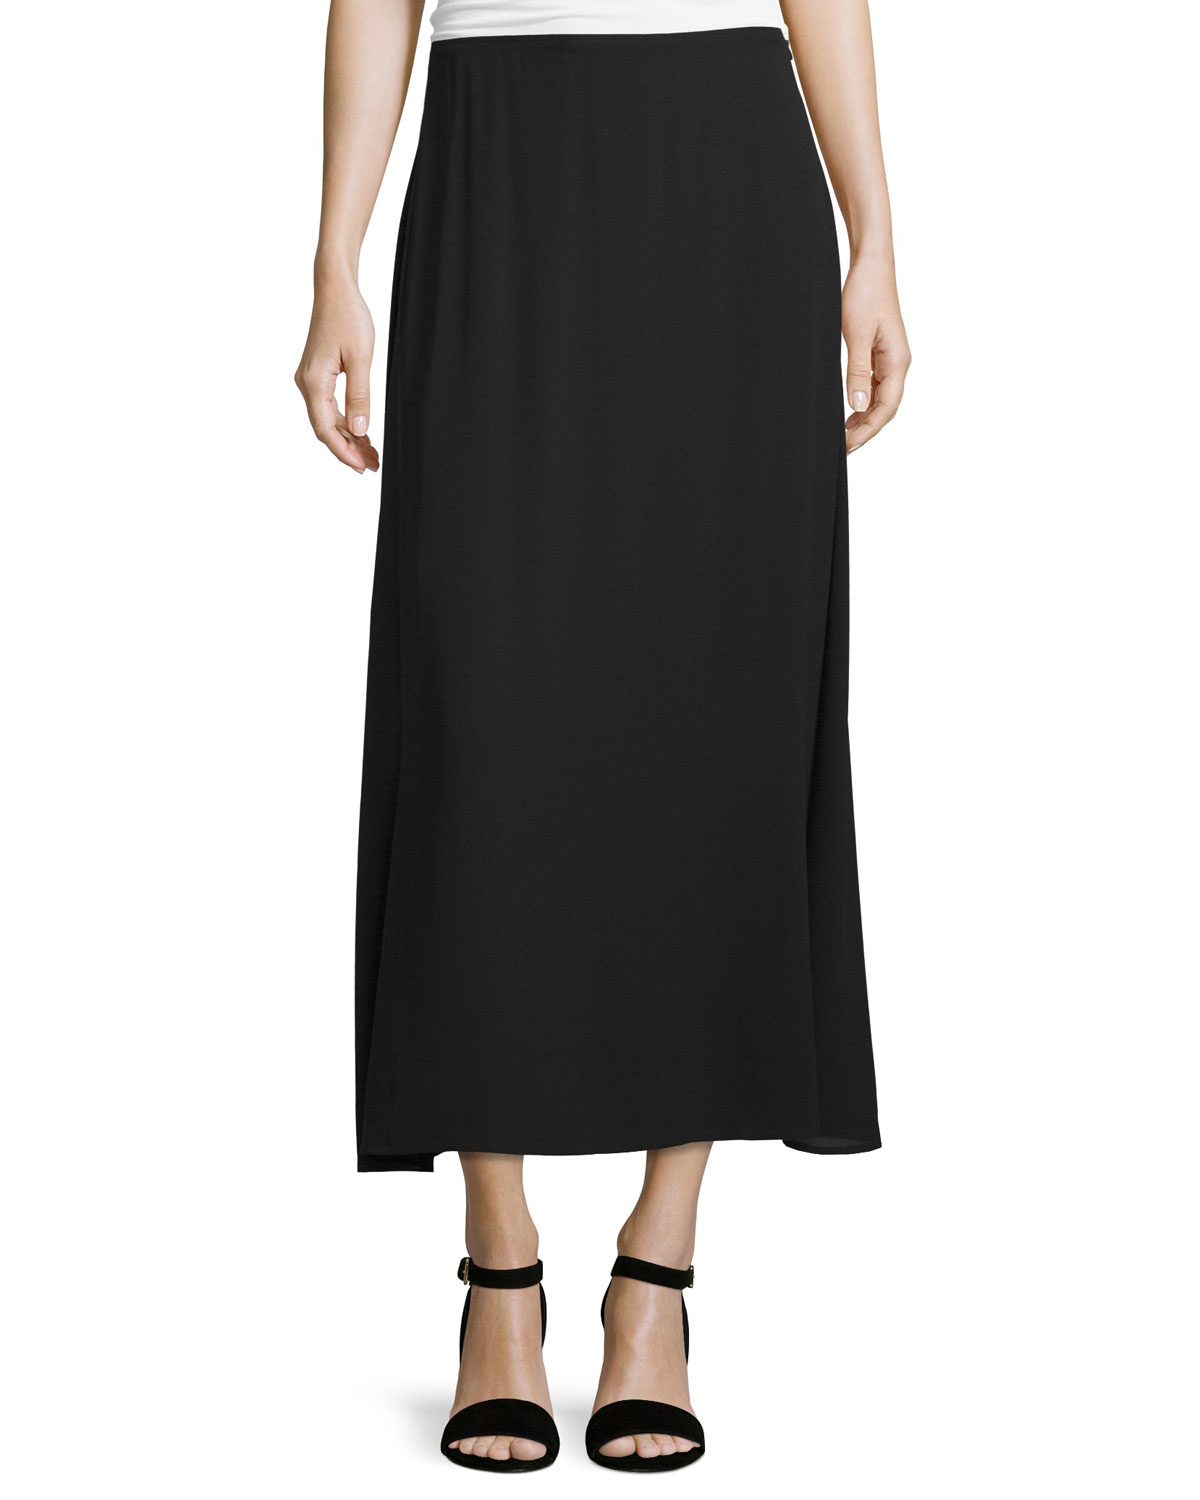 Lyst - Eileen Fisher A-line Crepe Maxi Skirt in Black